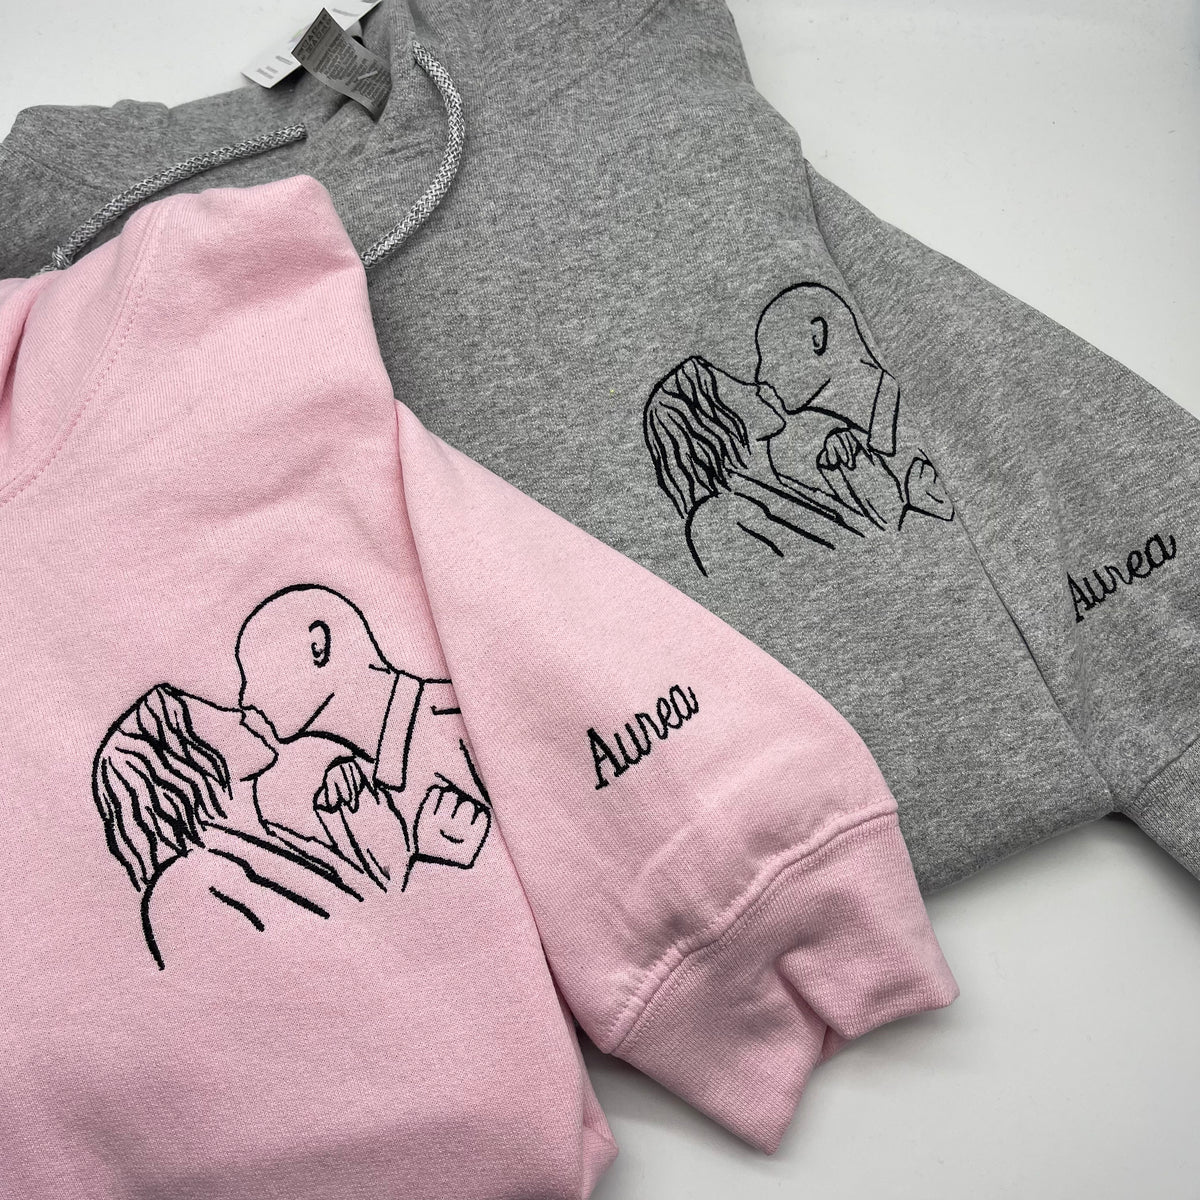 Matching Personalised Portrait Hoodie. Personalized wedding gifts, personalised gifts for him, customisable hoodies.